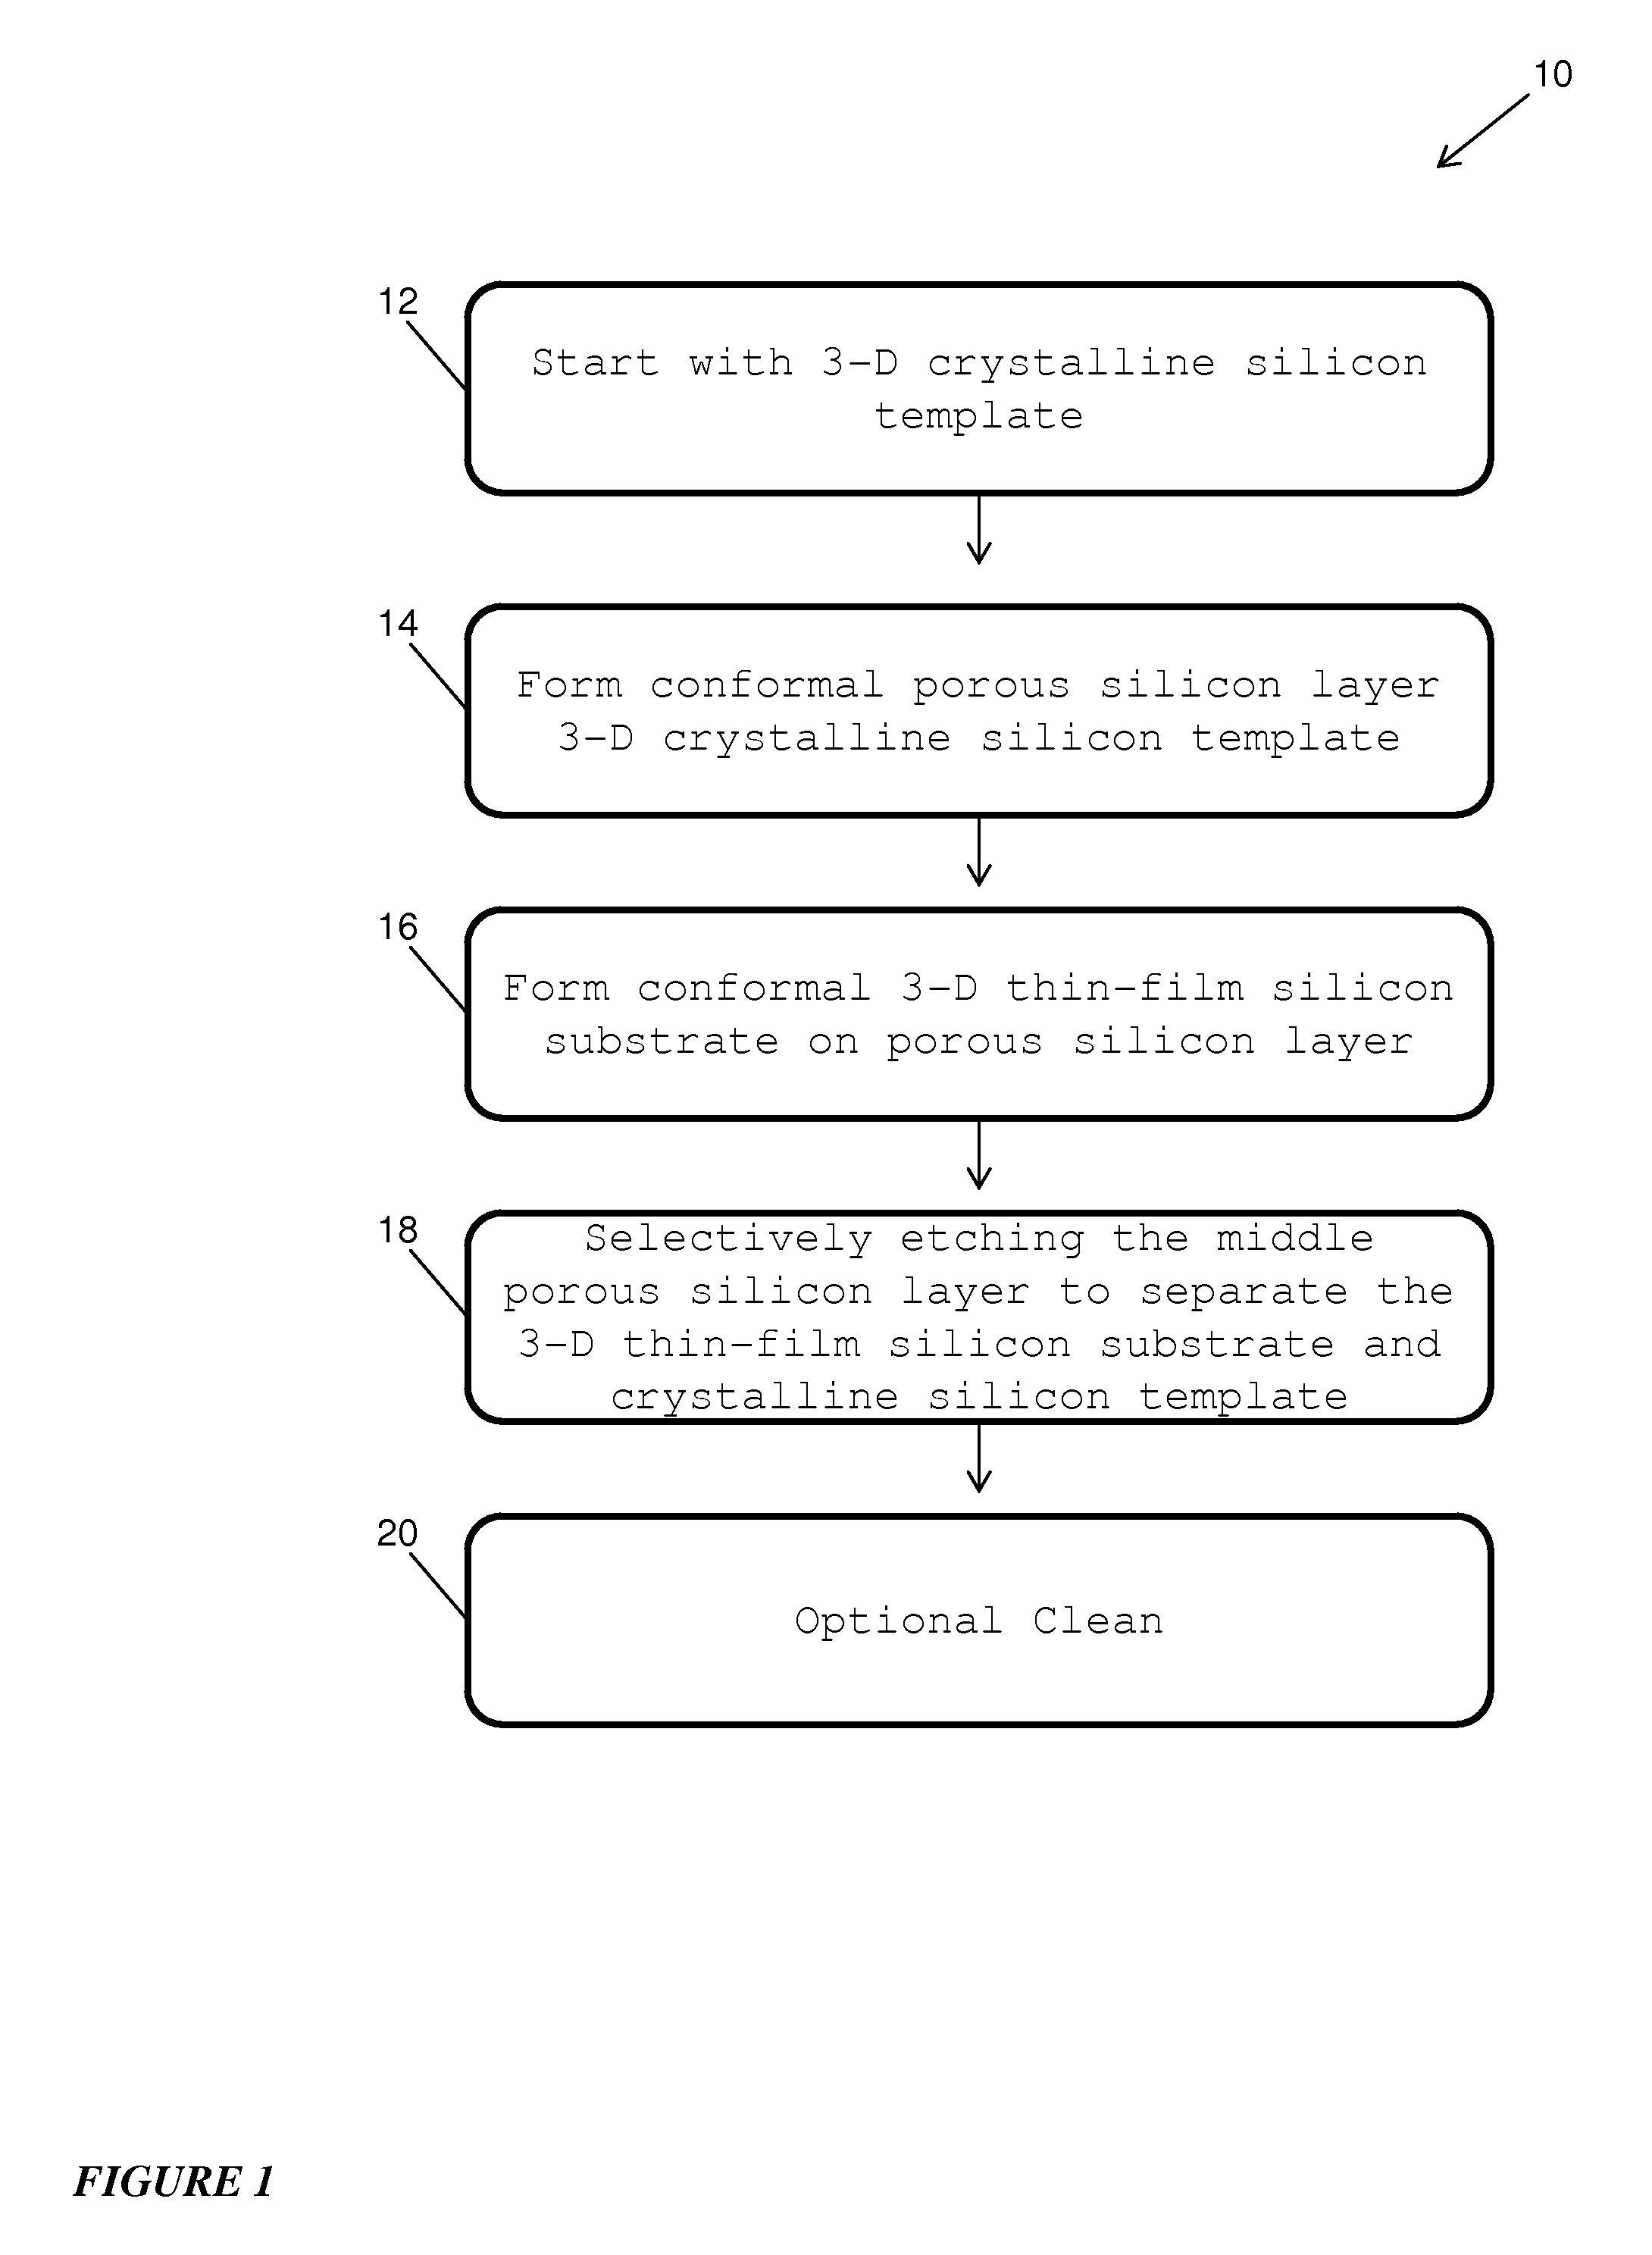 Method For Releasing a Thin-Film Substrate